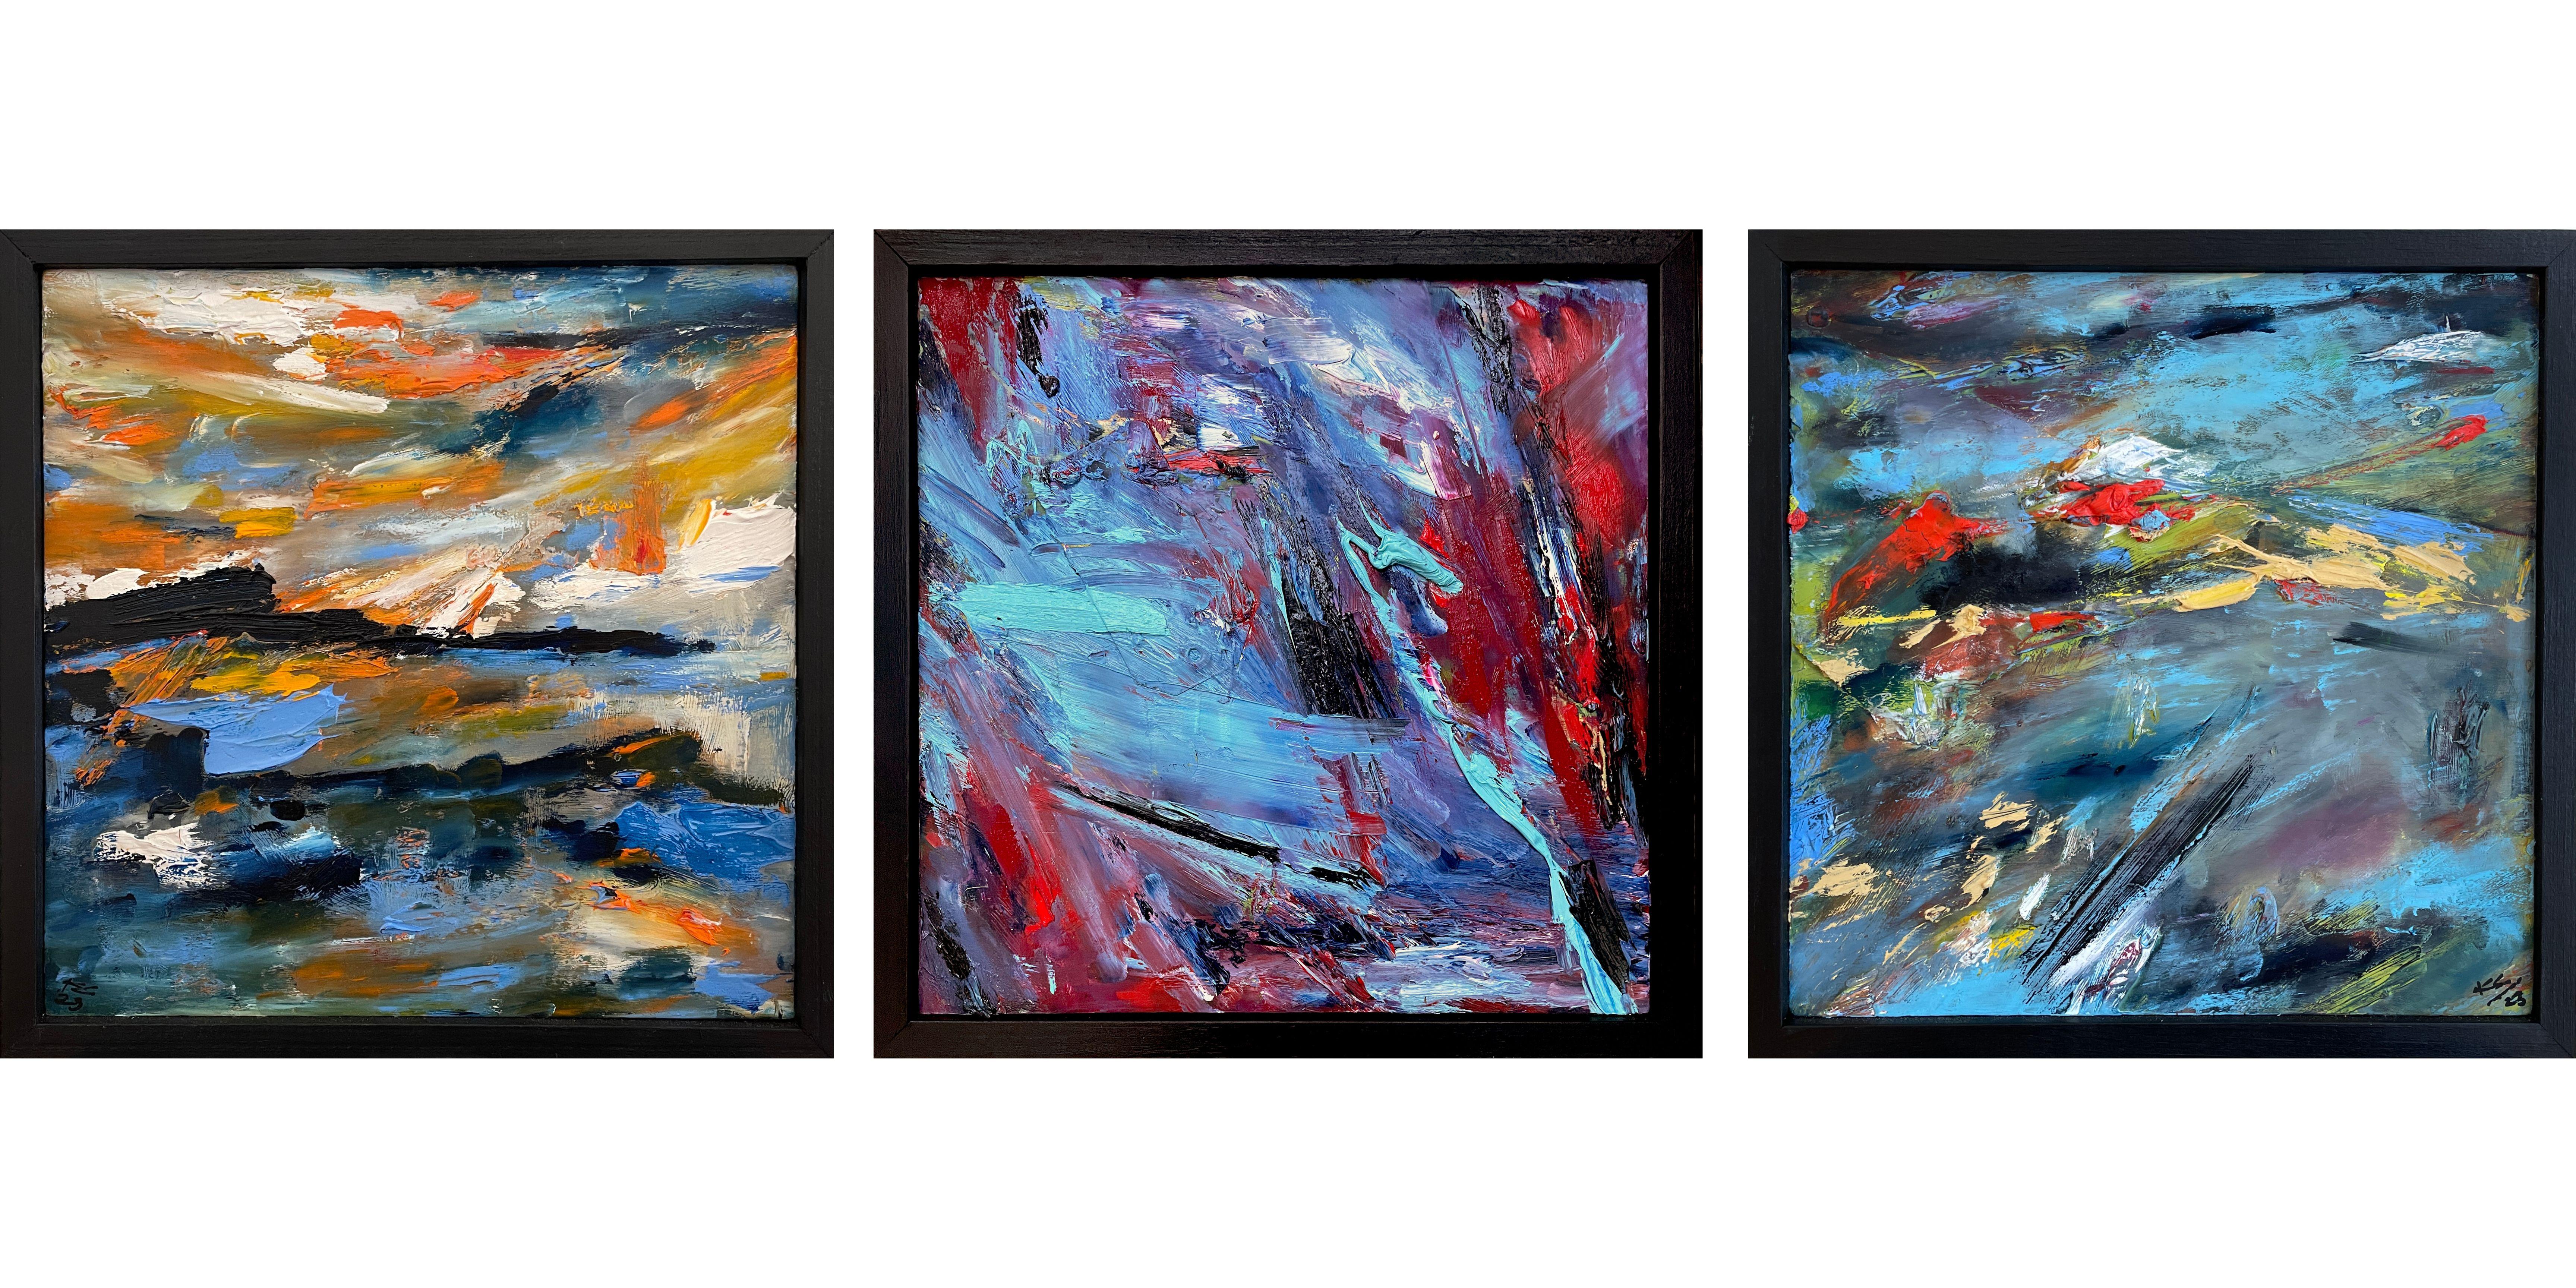 In this 12" x 36" abstract expressionist triptych, artist Kristy Chettle captures the vibrant essence of Monterey Bay's varied landscapes. The panels are a symphony of color, with cerulean and sapphire blues that speak to the depths of the Pacific,